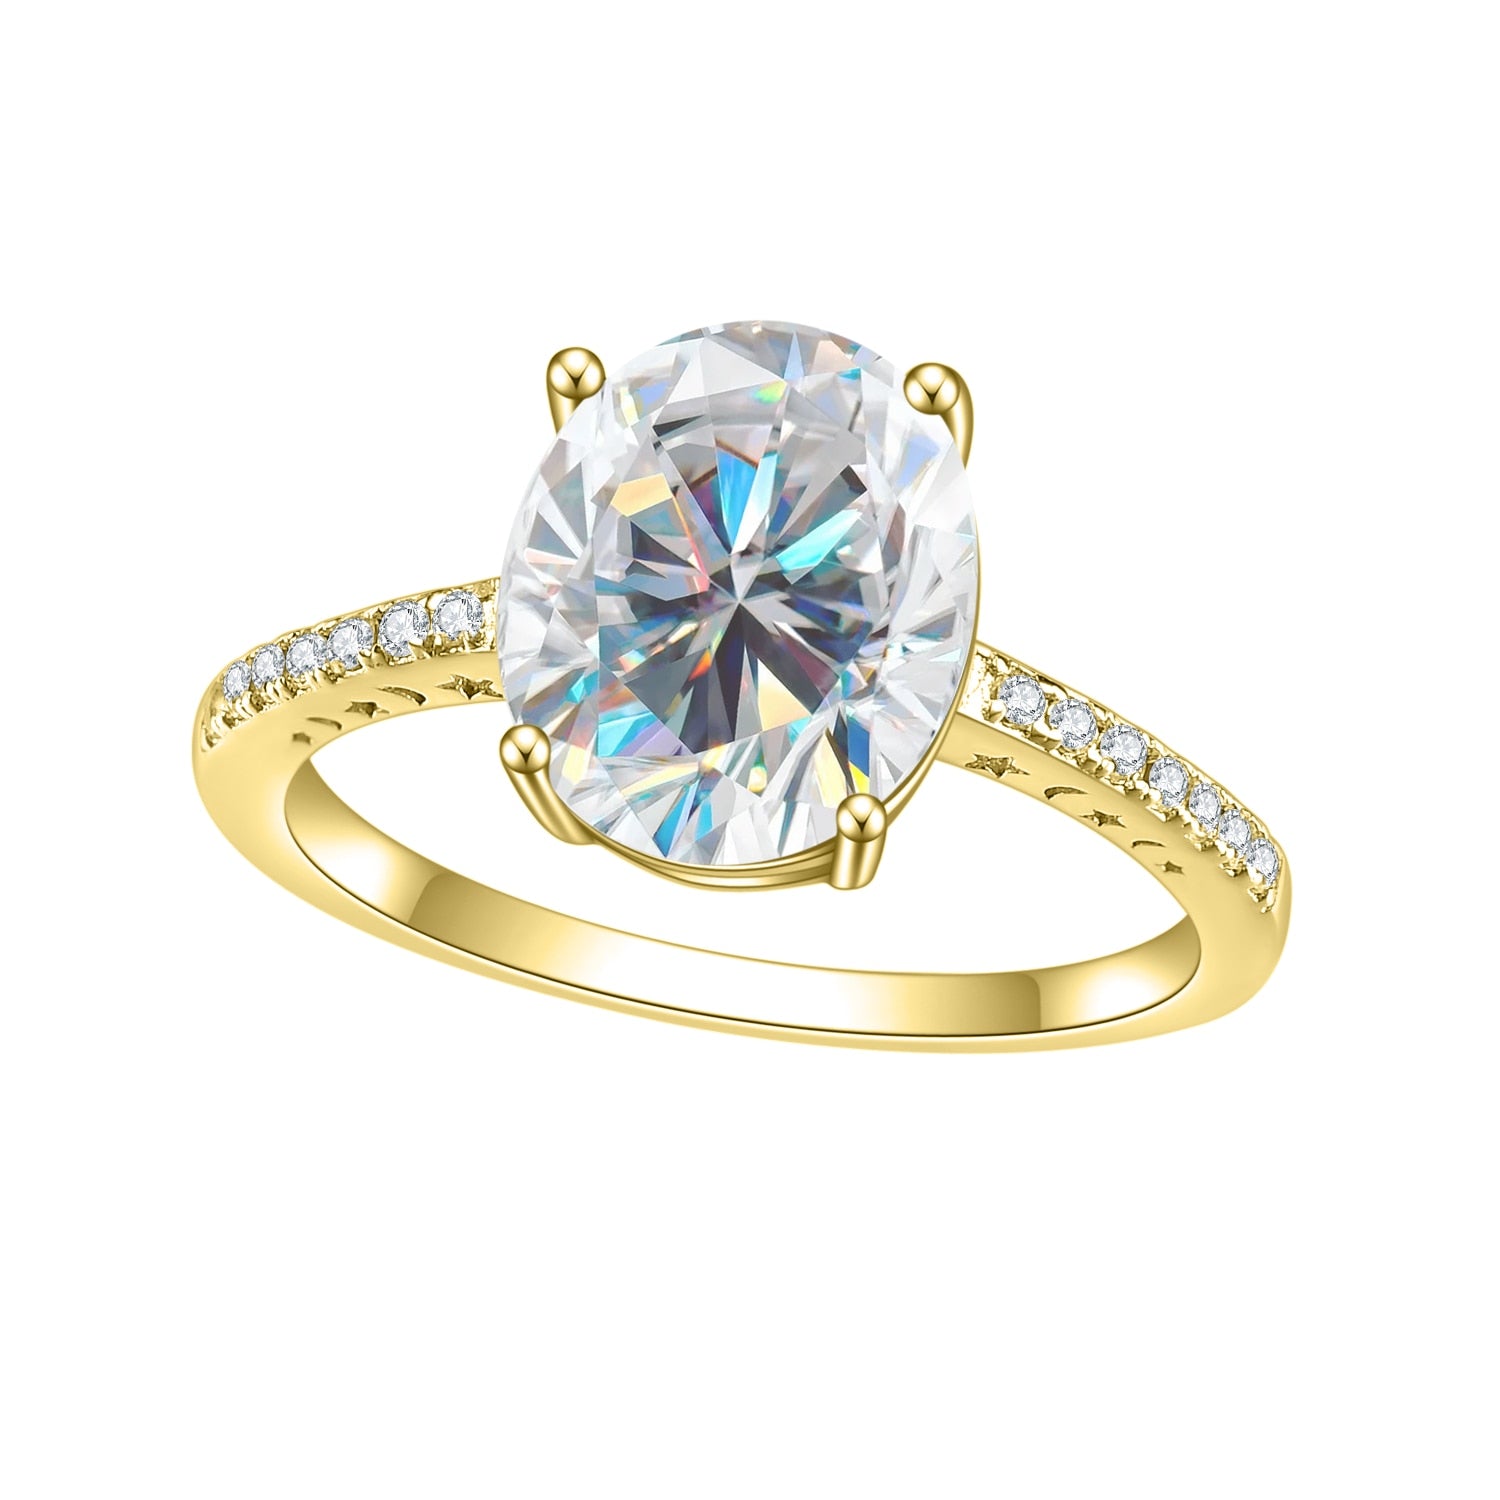 A gold pave band with moon and star cut outs on each side, set with a 3CT oval moissanite.